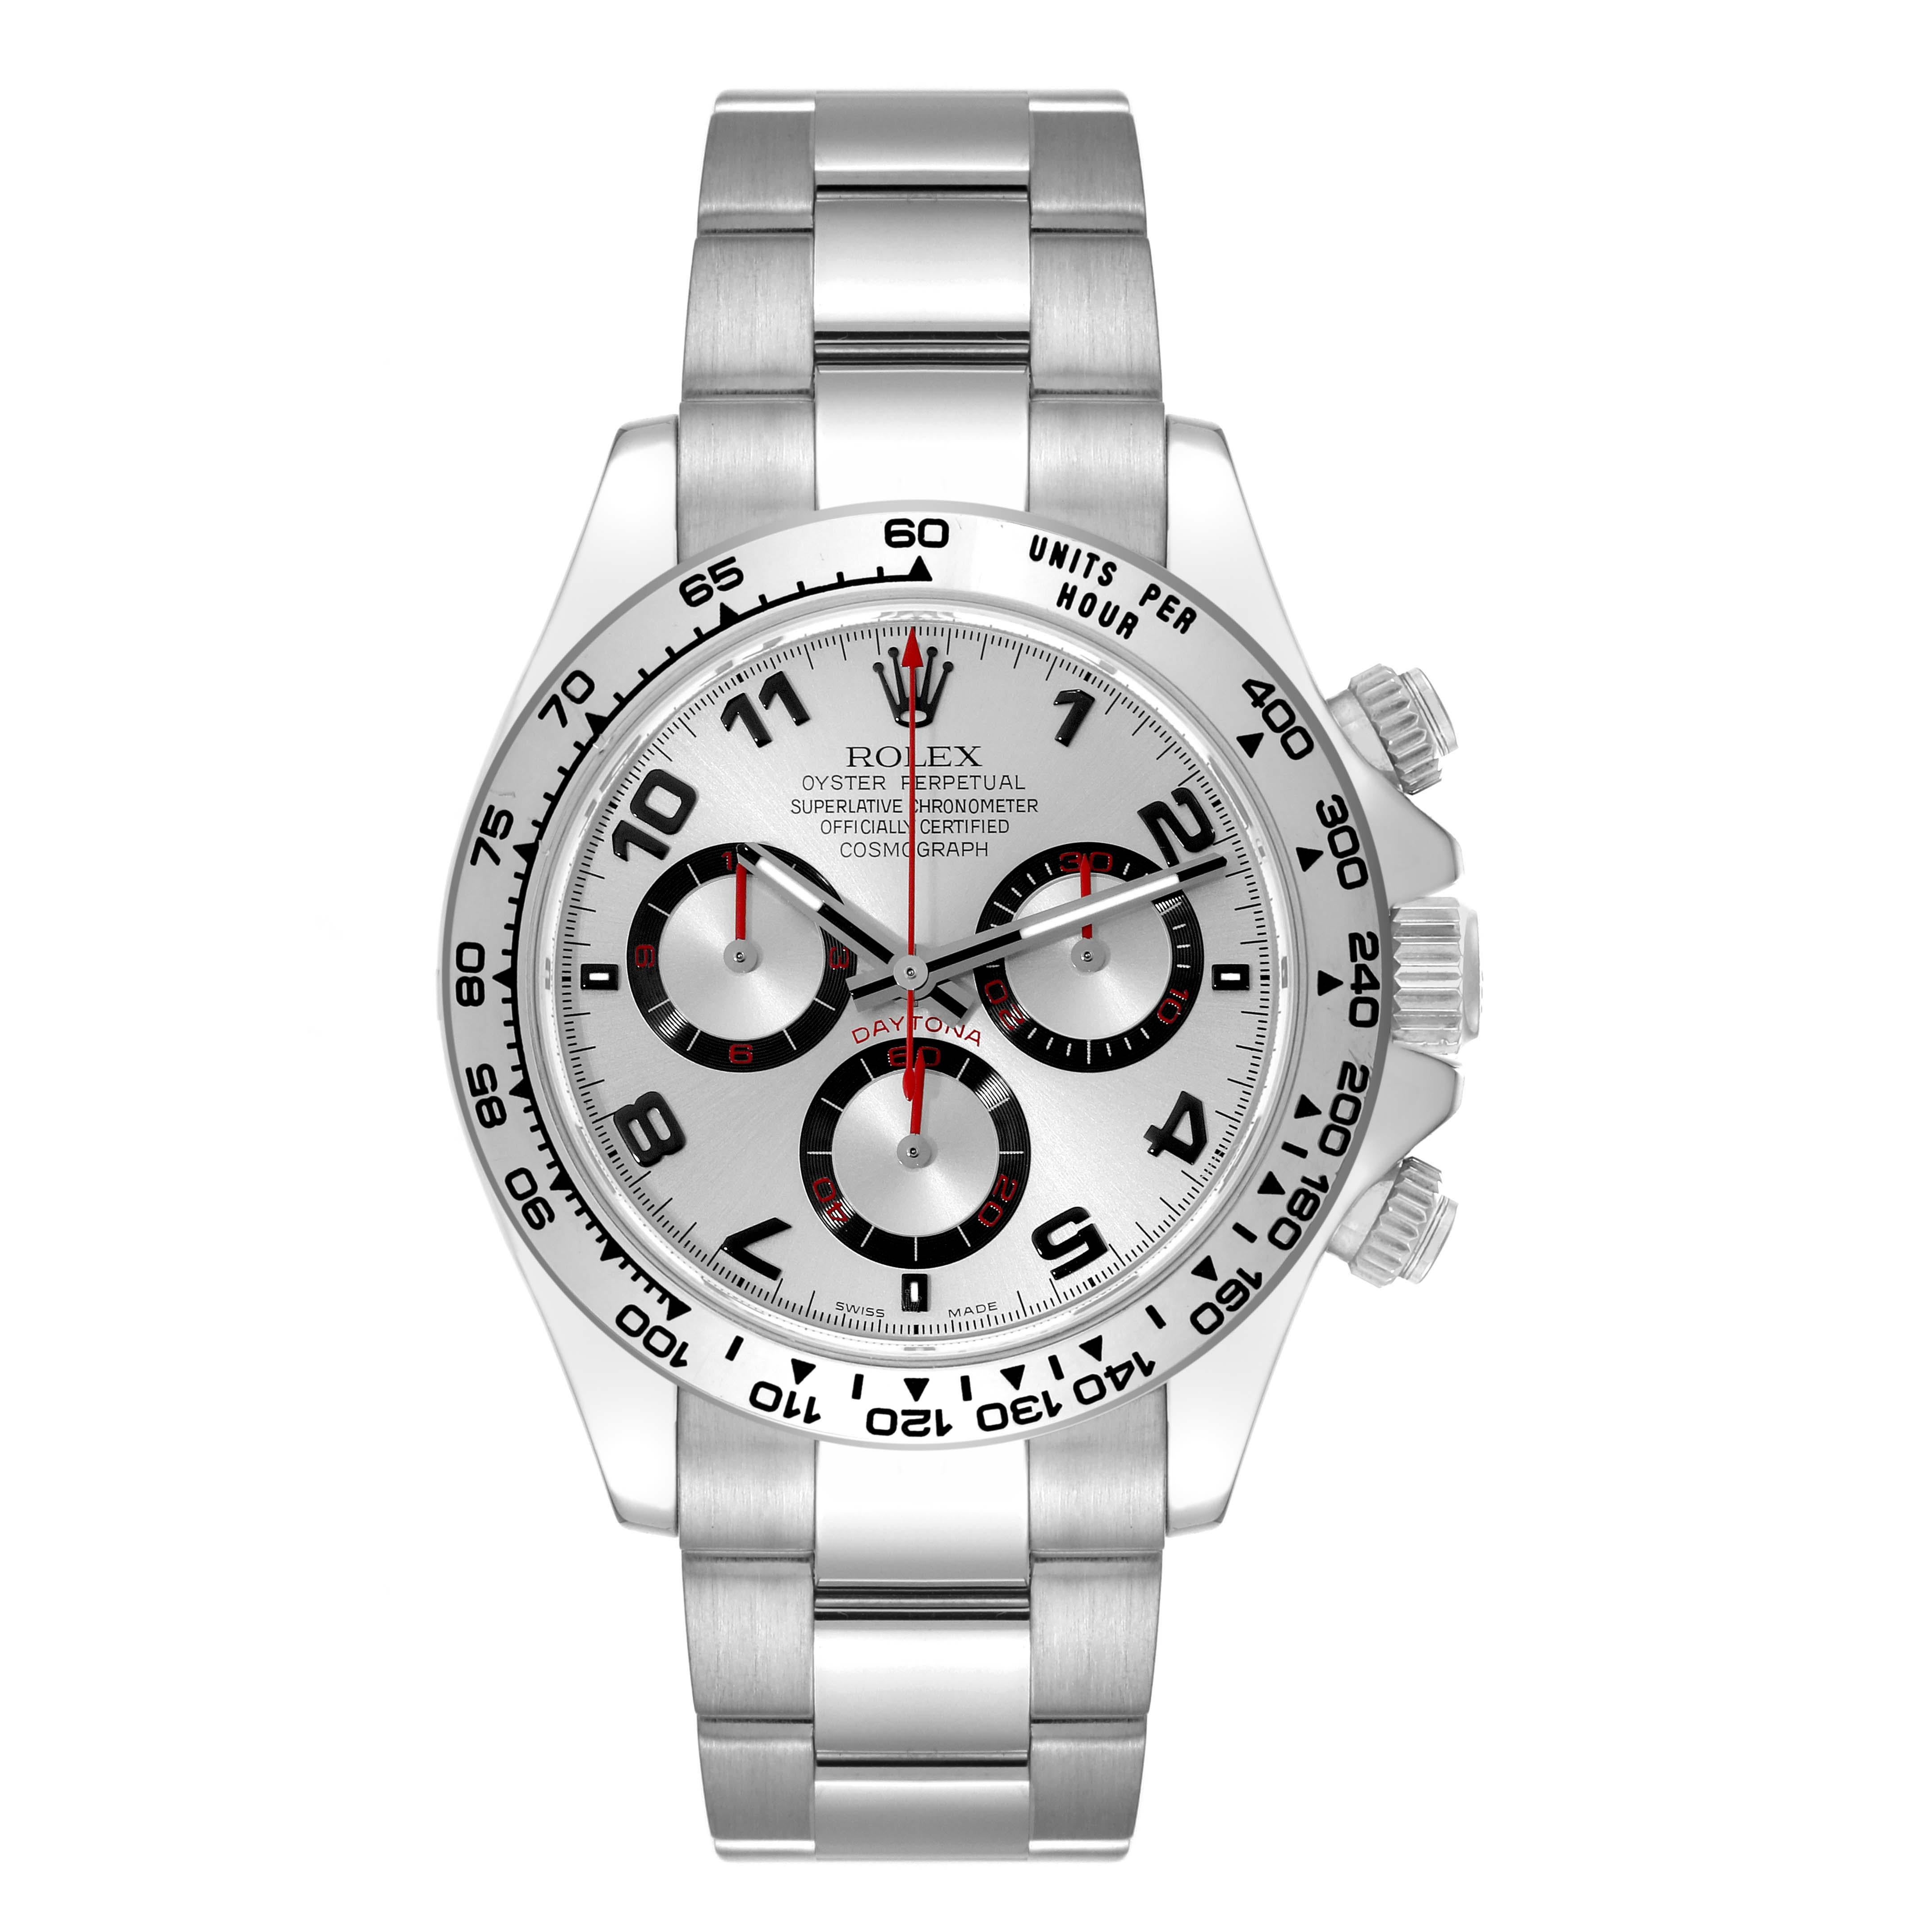 Rolex Daytona White Gold Silver Racing Dial Mens Watch 116509 Box Card. Officially certified chronometer self-winding movement. Rhodium-plated, 44 jewels, straight line lever escapement, monometallic balance adjusted to temperatures and 5 positions,